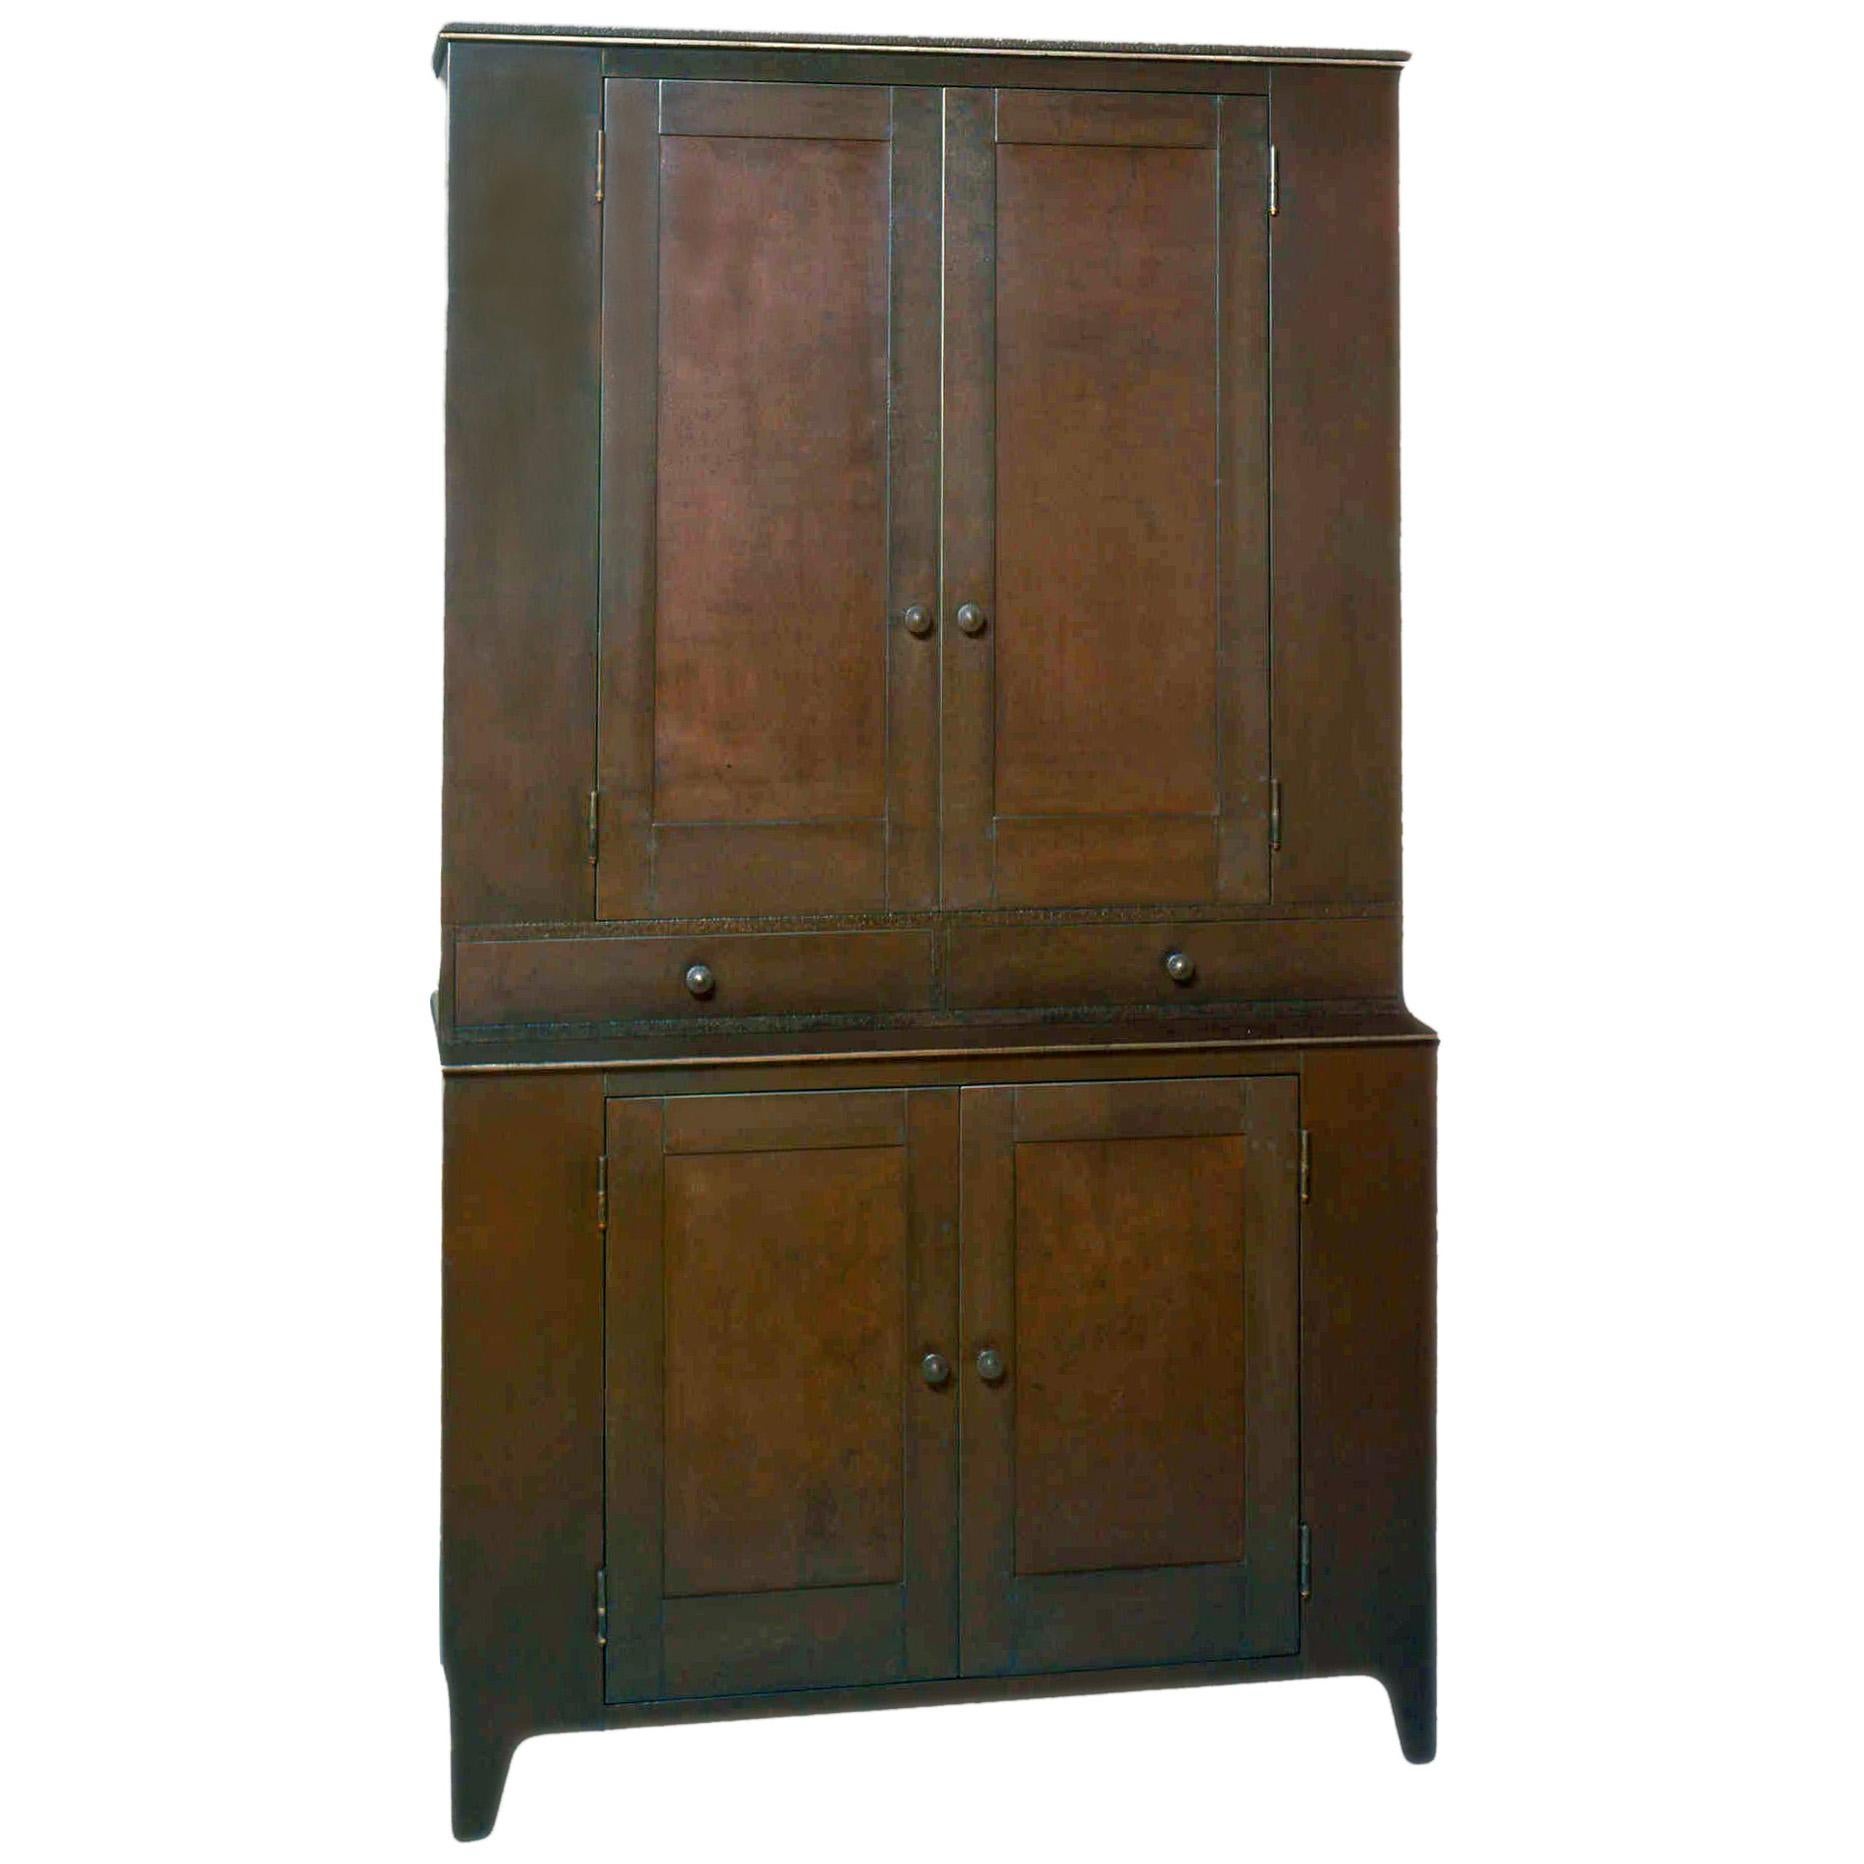 Jim Rose Legacy Collection - Four Door Two-Drawer Shaker Inspired Steel Cupboard